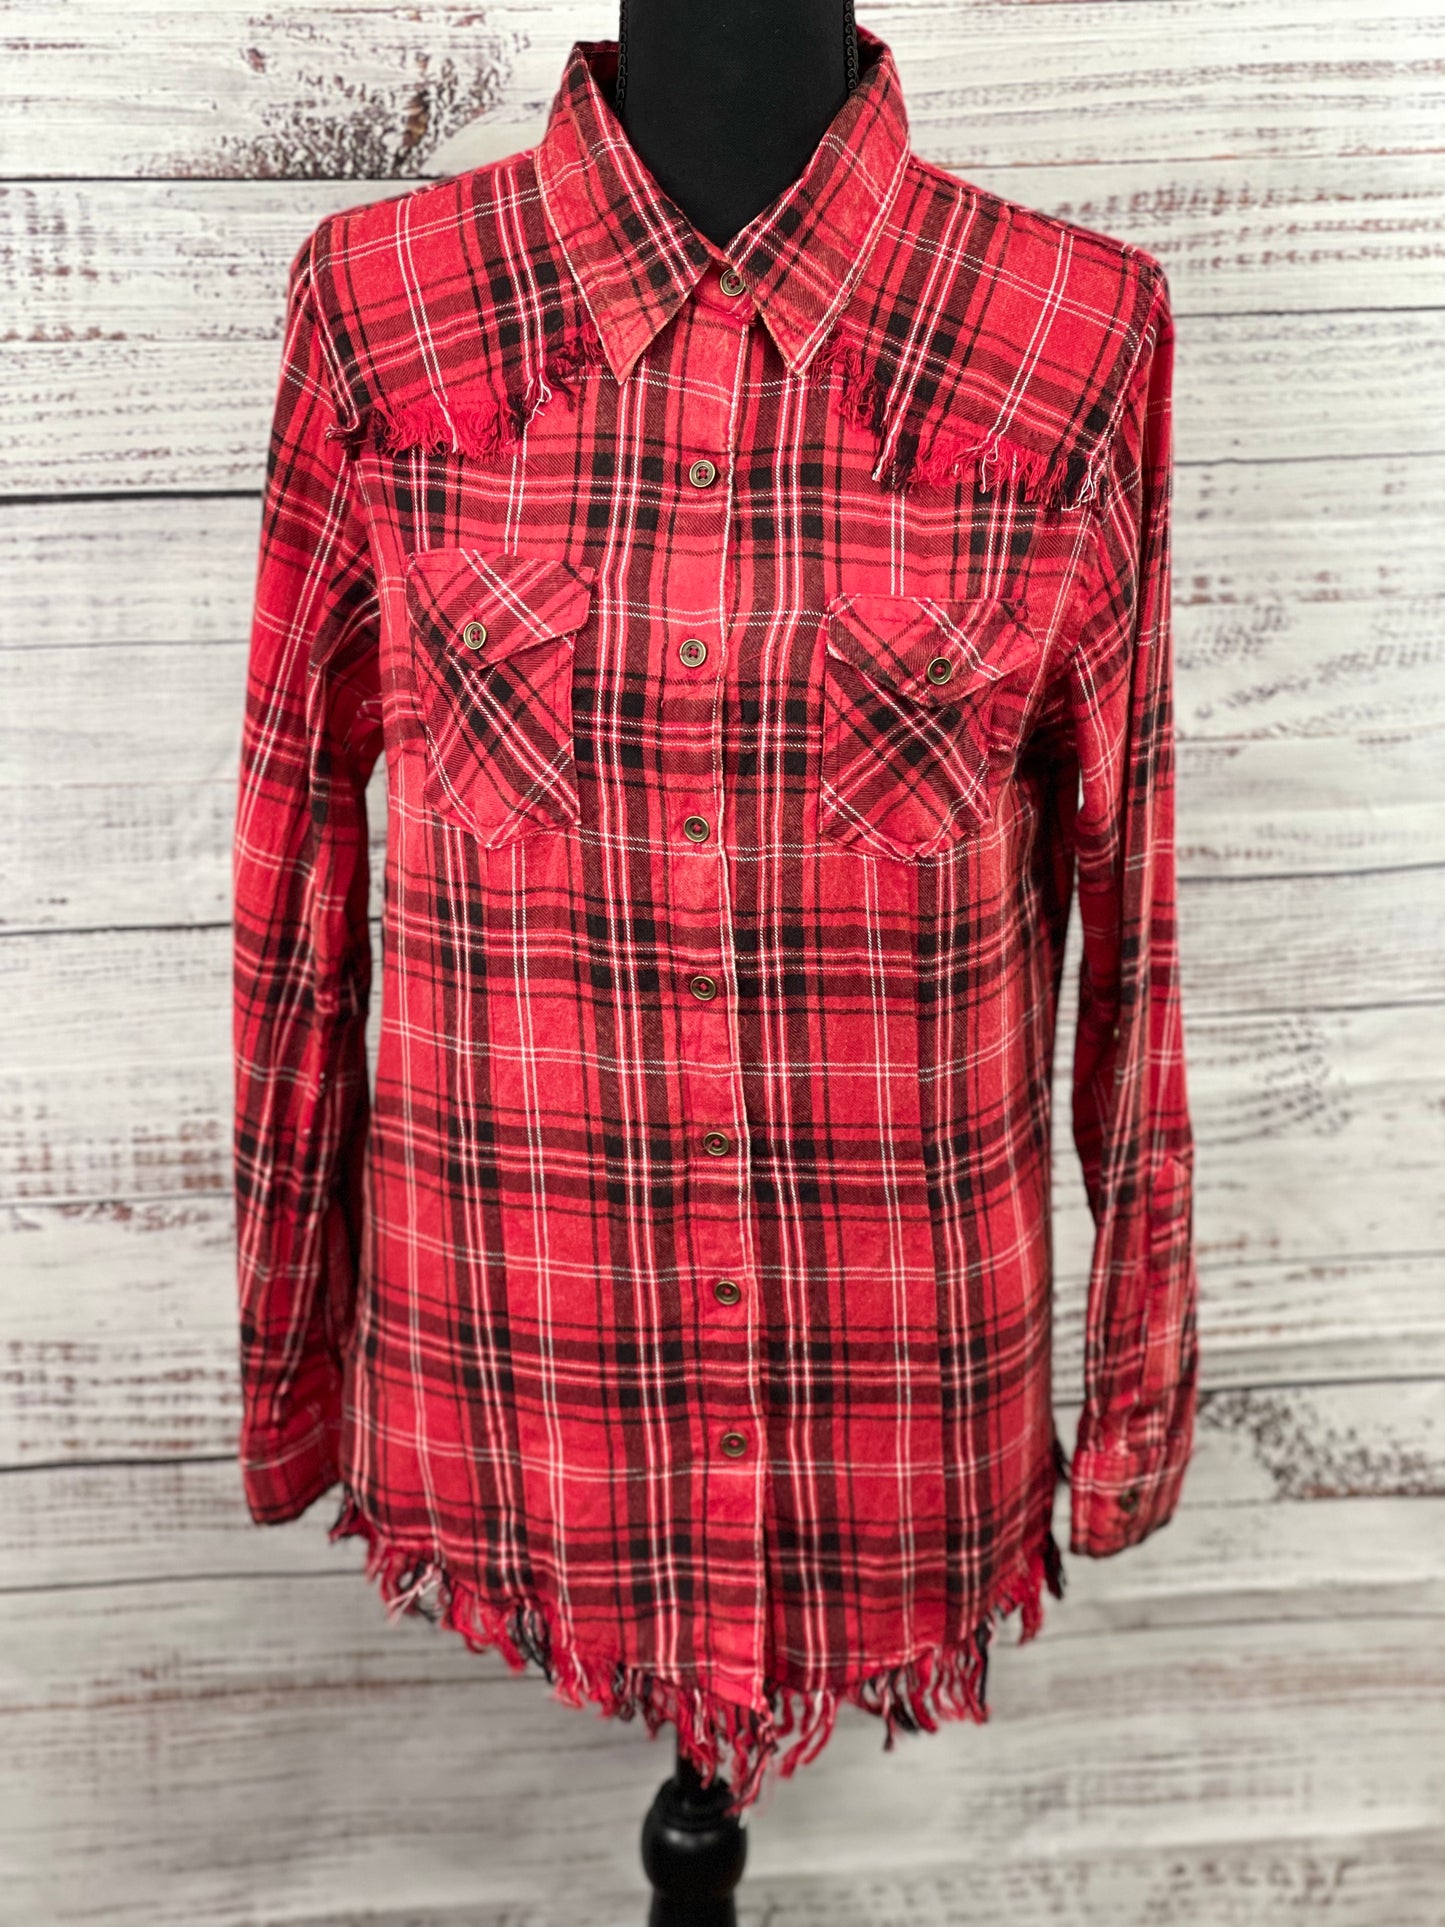 Red and Black Plaid Flannel Shirt with Fringe Hem